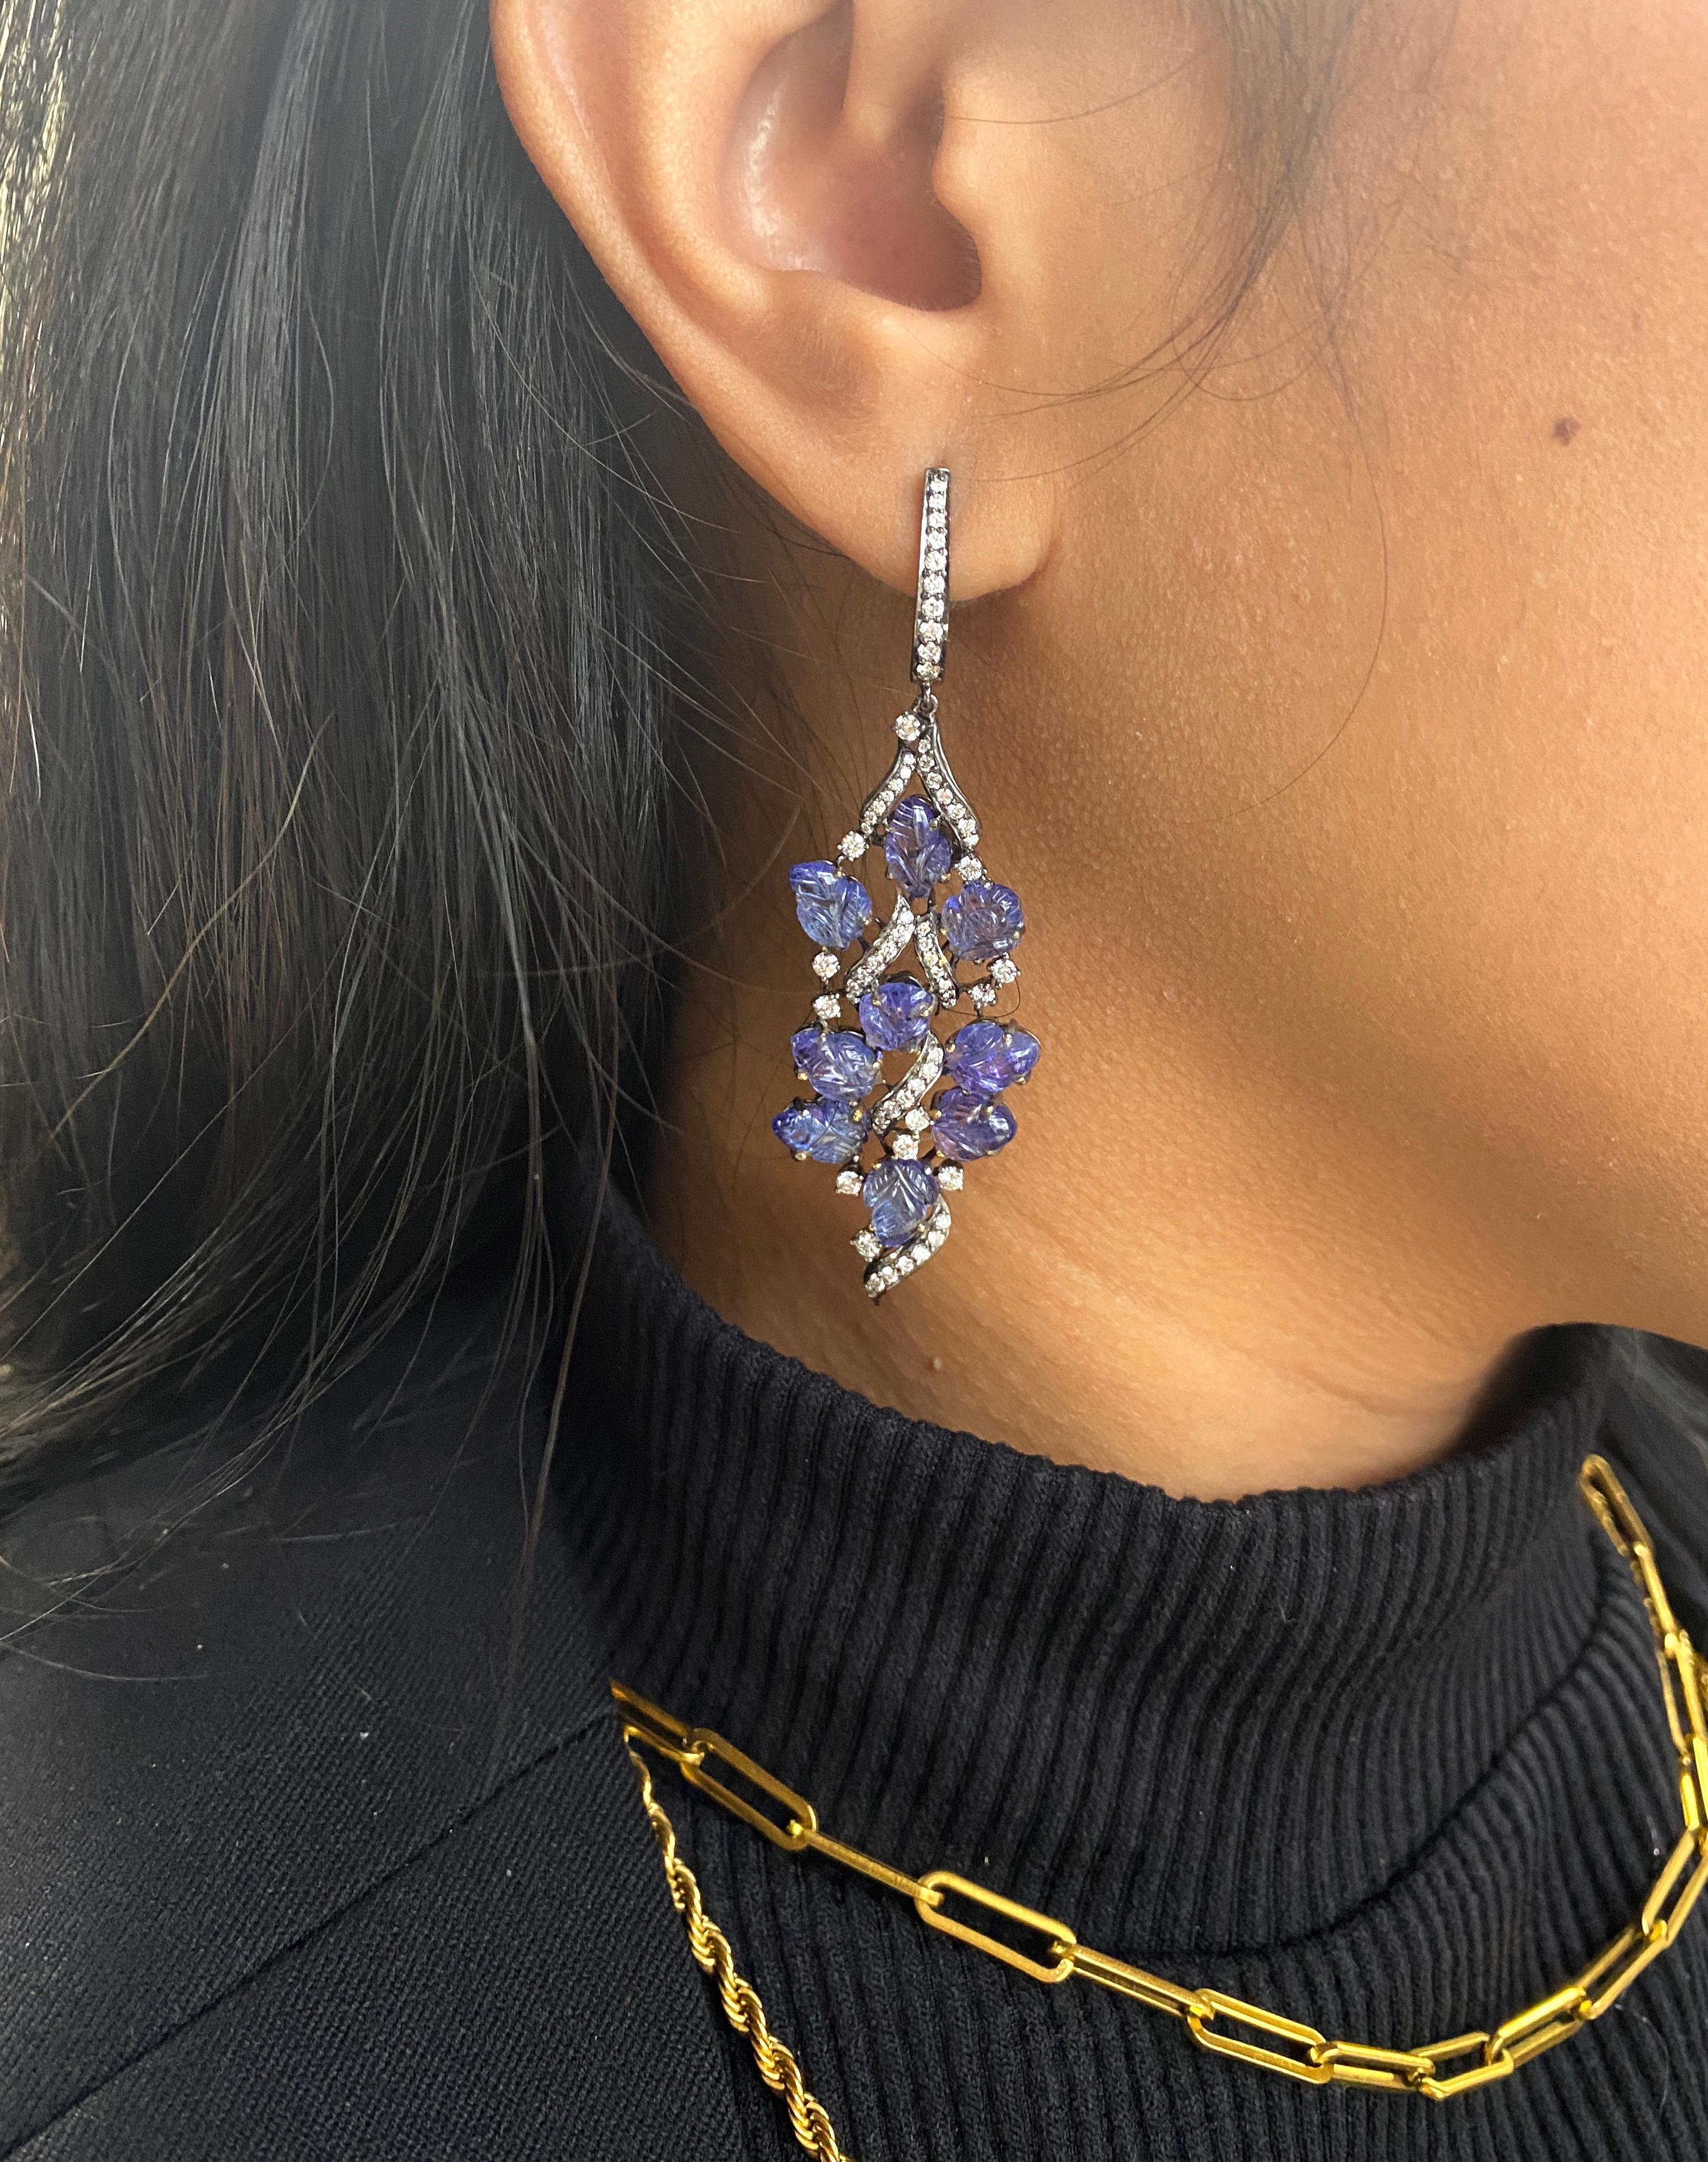 Carved Tanzanite Leaf Chandelier Earrings with Diamonds in 18K Yellow Gold, from 'G-One' Collection. If you want to make a statement, this is the perfect piece to do it!

* Gemstone: 100% Earth Mined 
* Approx. gemstone Weight: 12.16 Carats